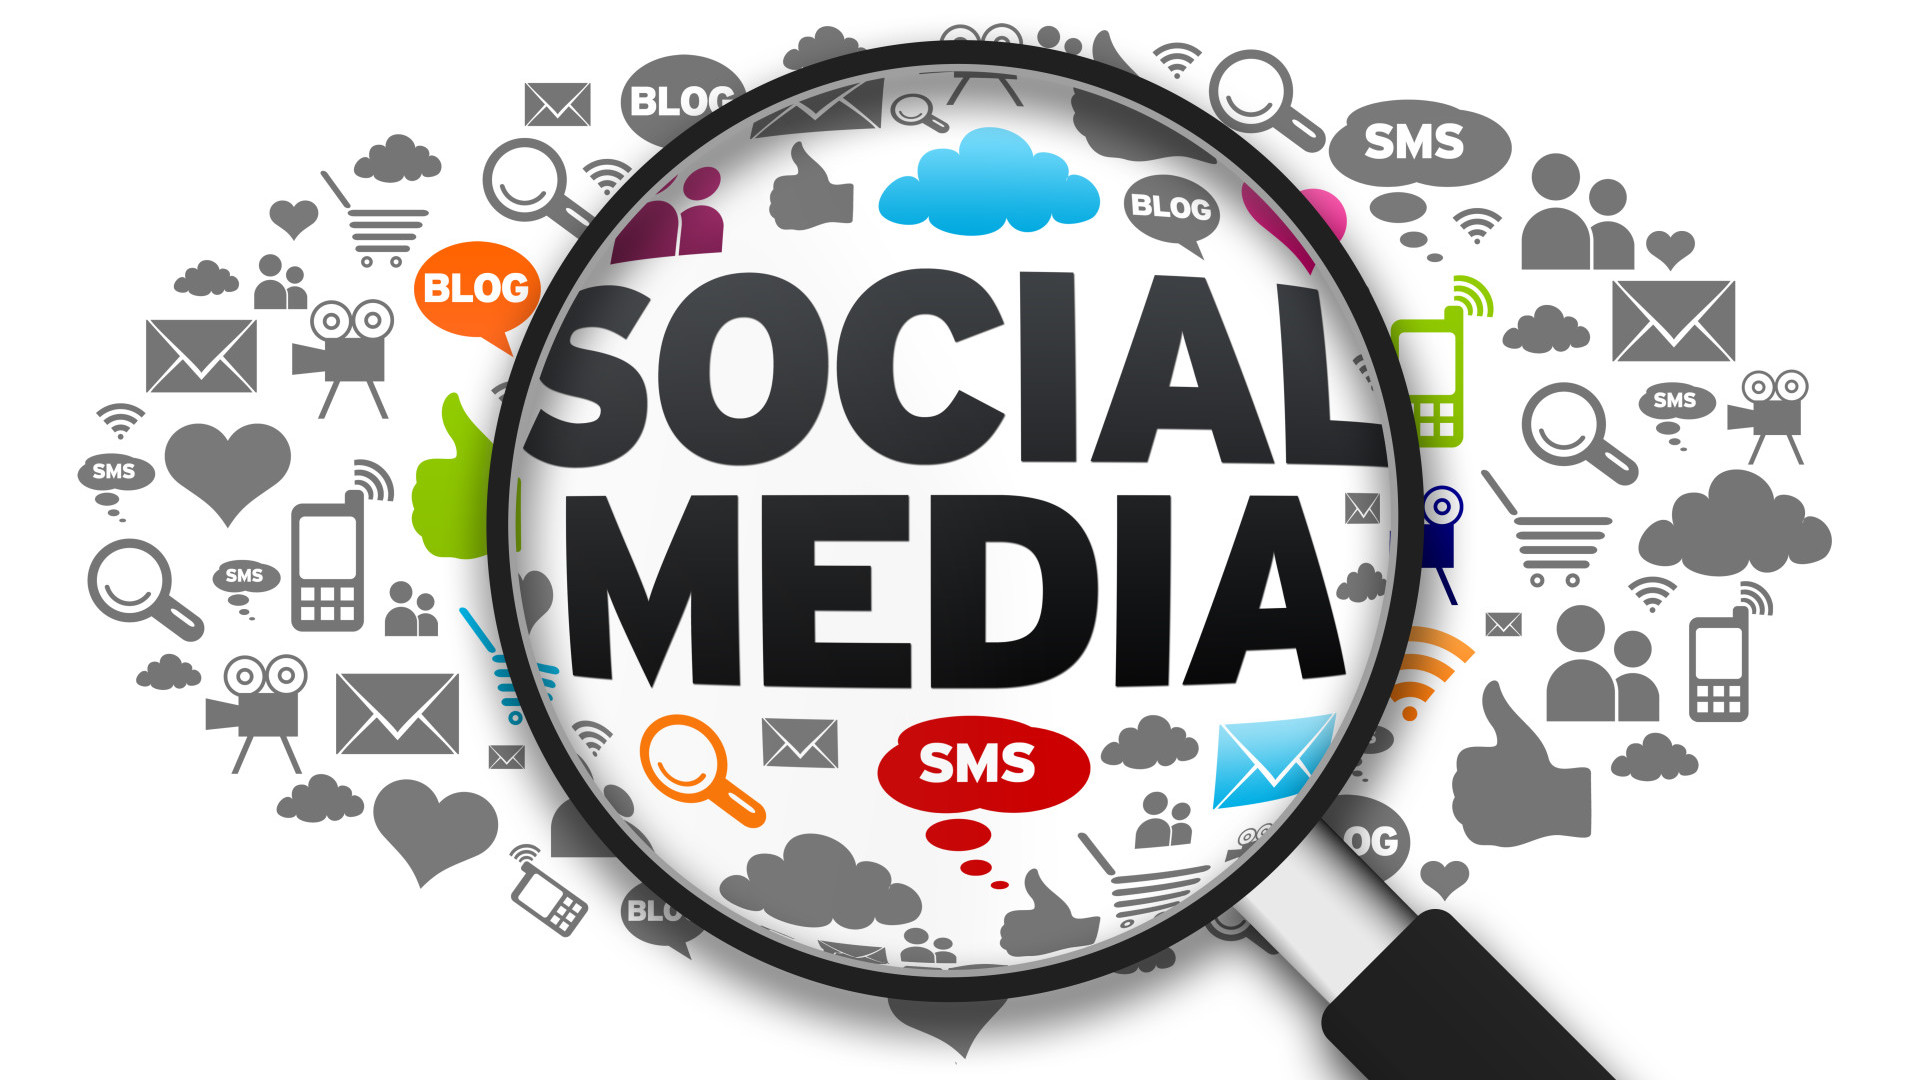 SME: What is Social Media? 1